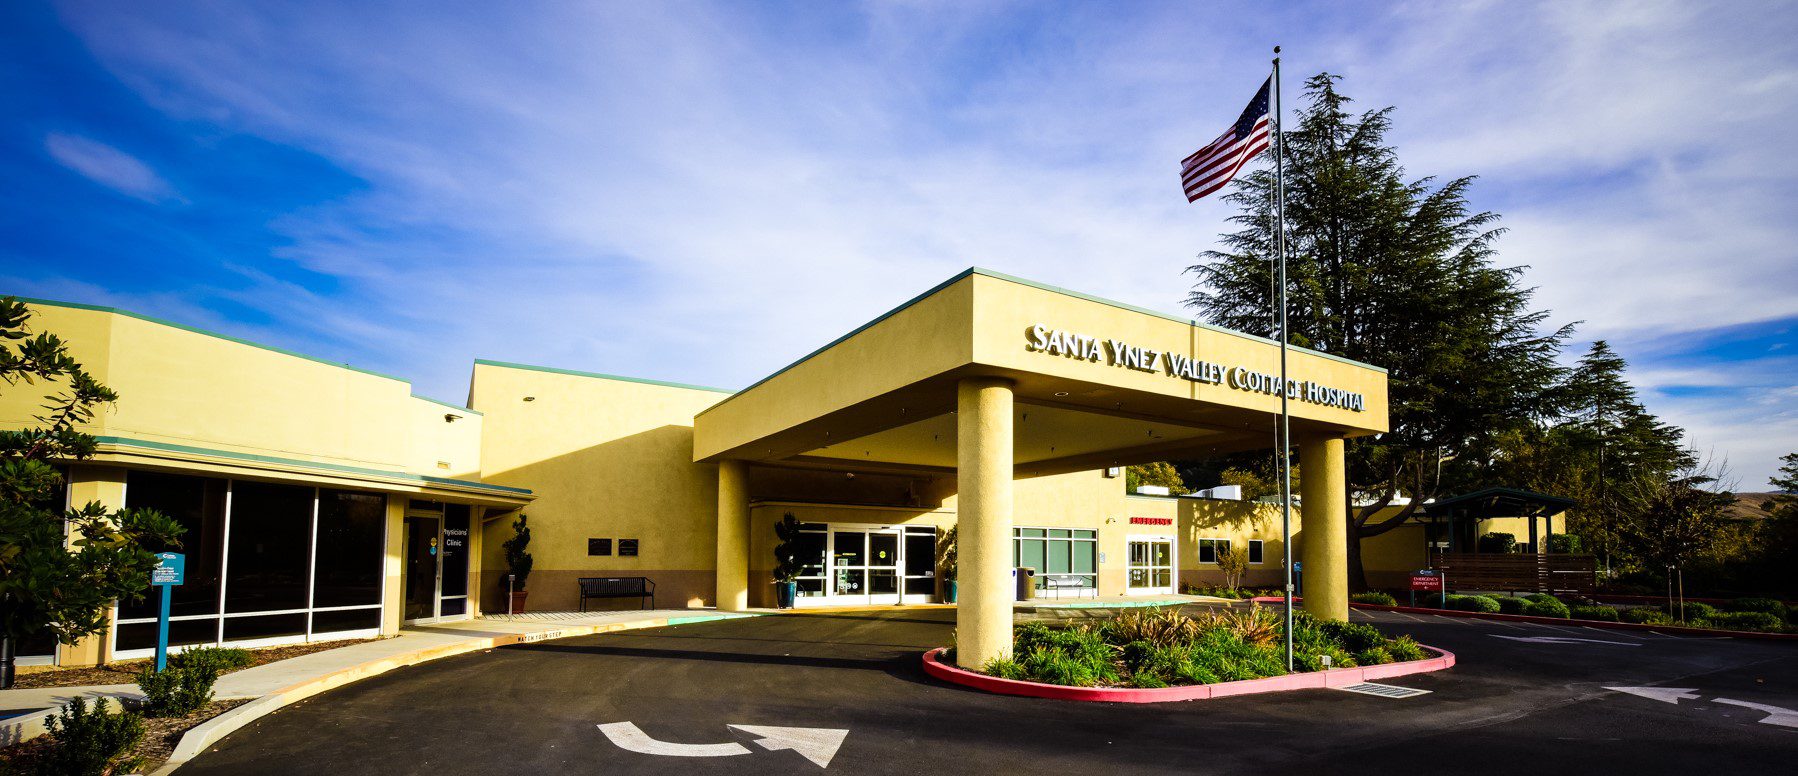 A Message from Santa Ynez Valley Cottage Hospital to Our Community